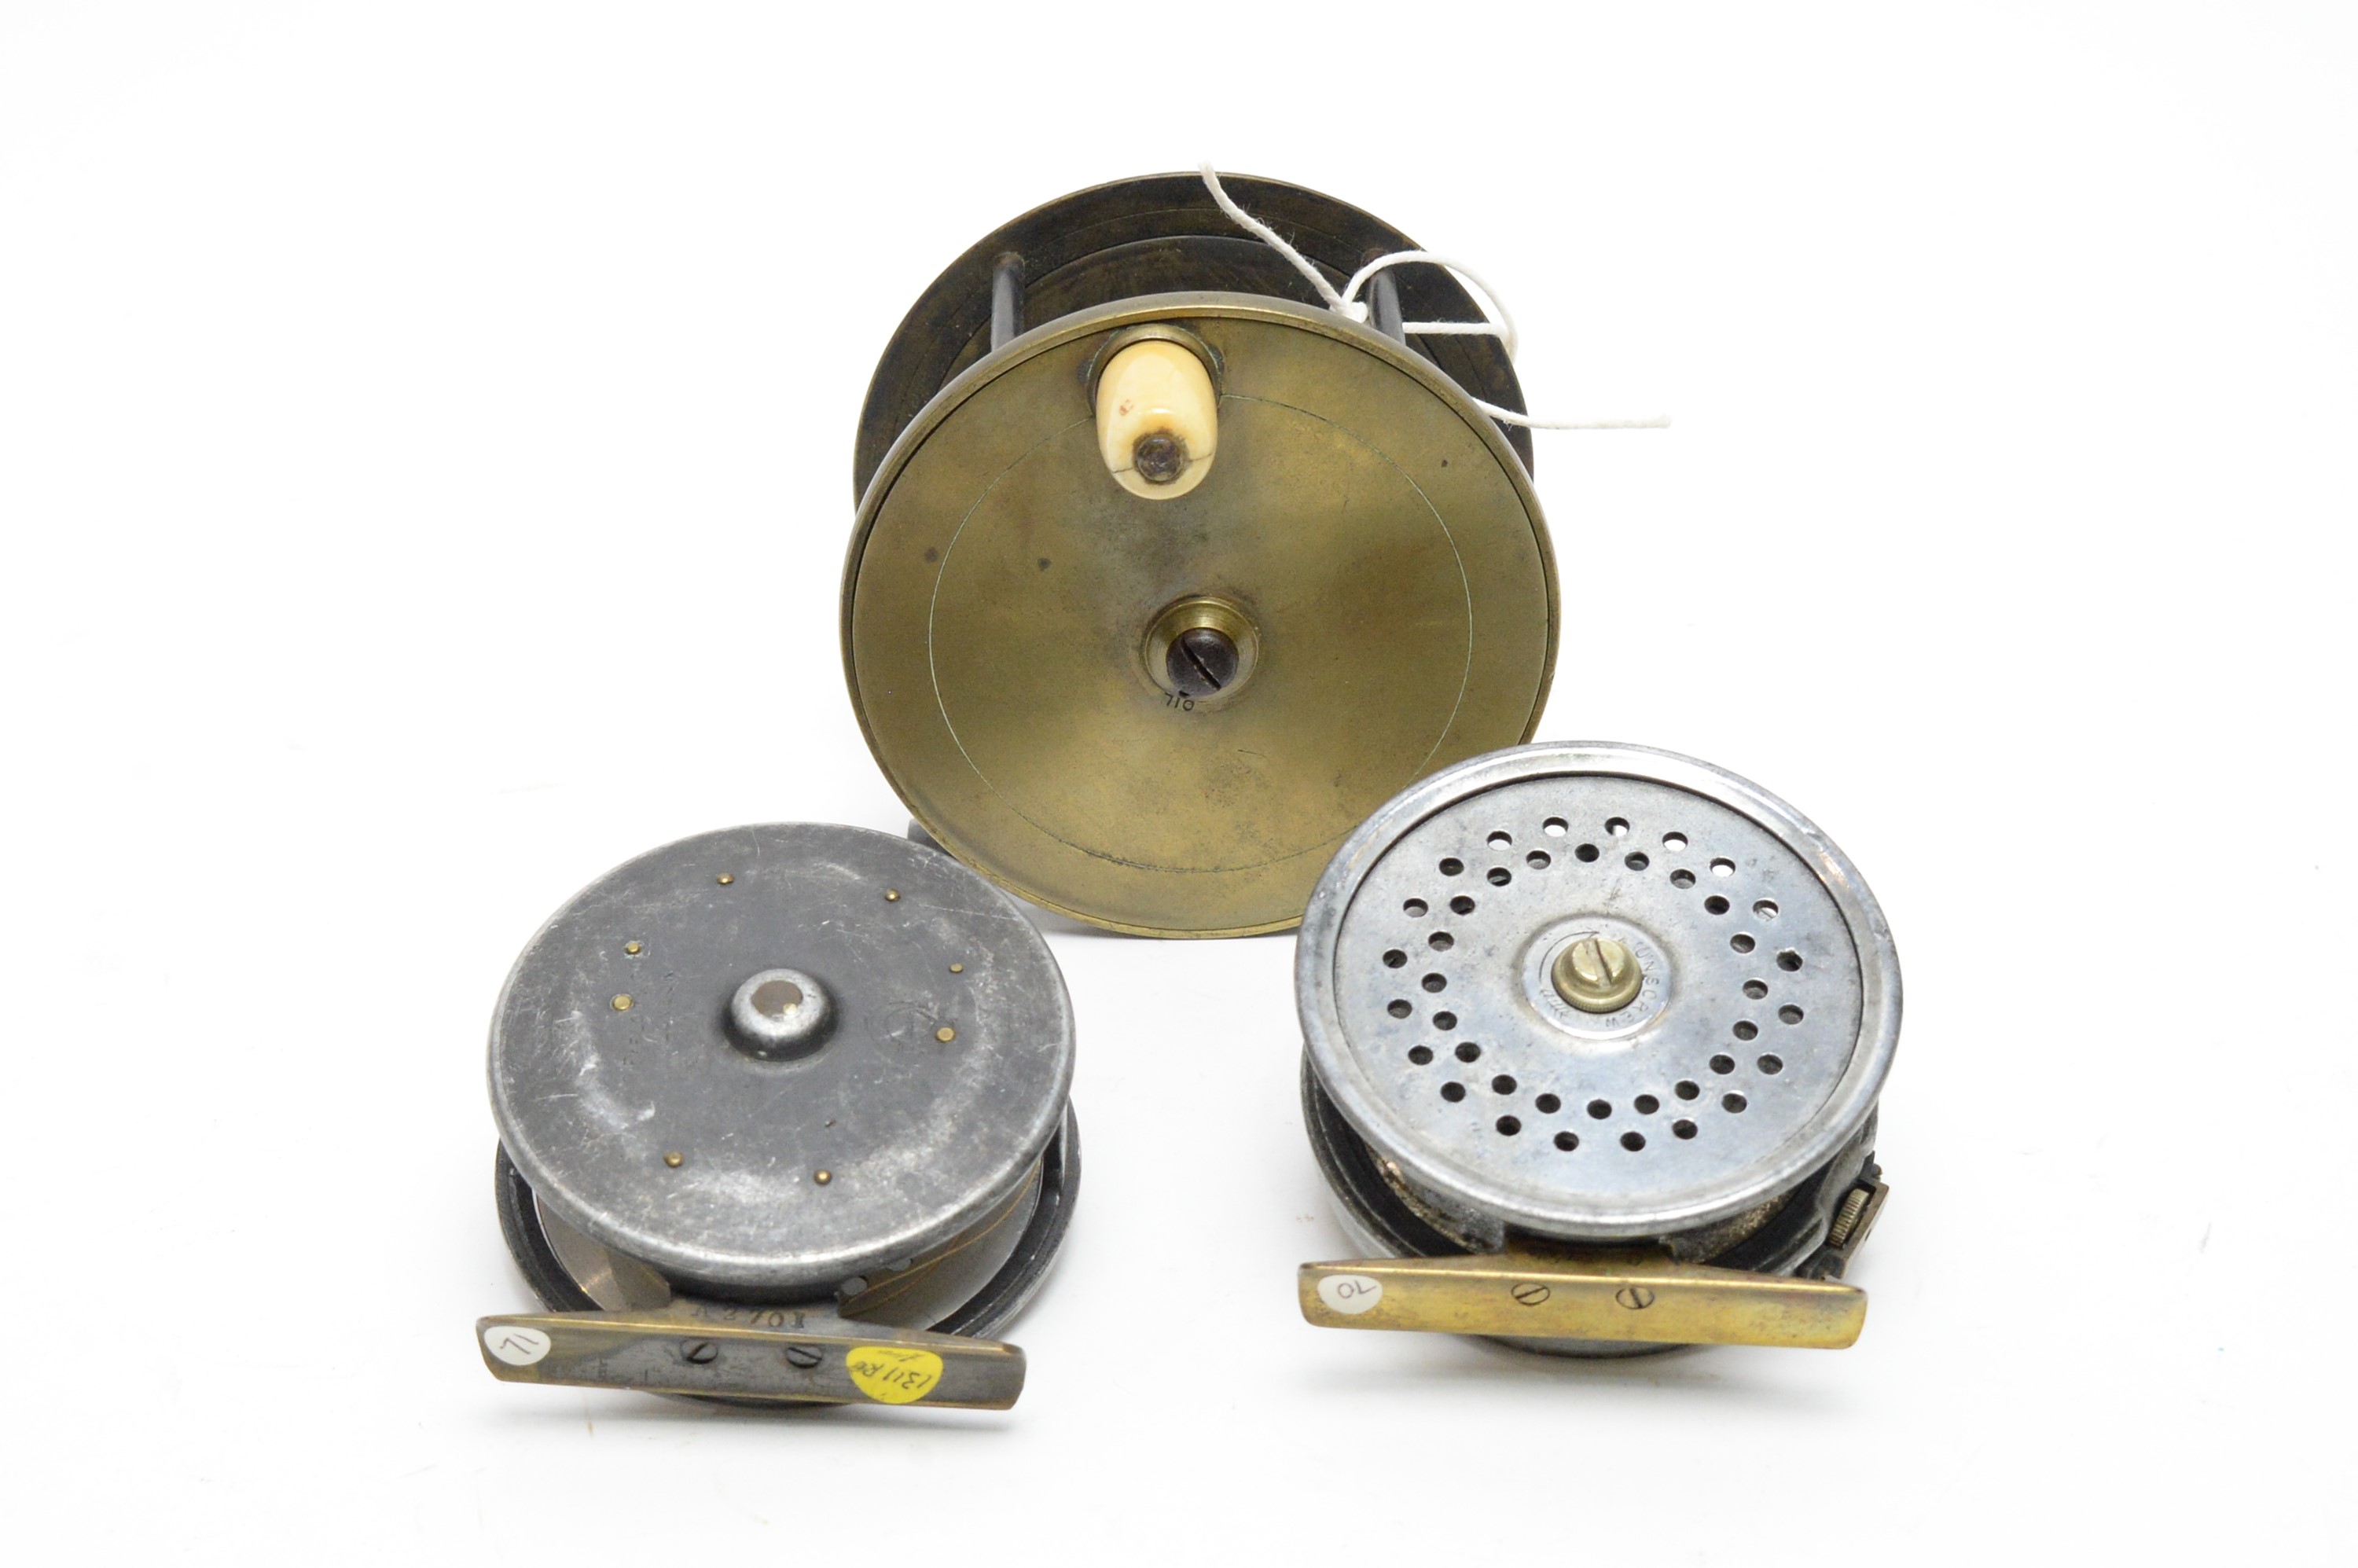 At Auction: A VINTAGE CASED FLY FISHING REEL BY C. FARLOW, 191 STRAND,  LONDON.